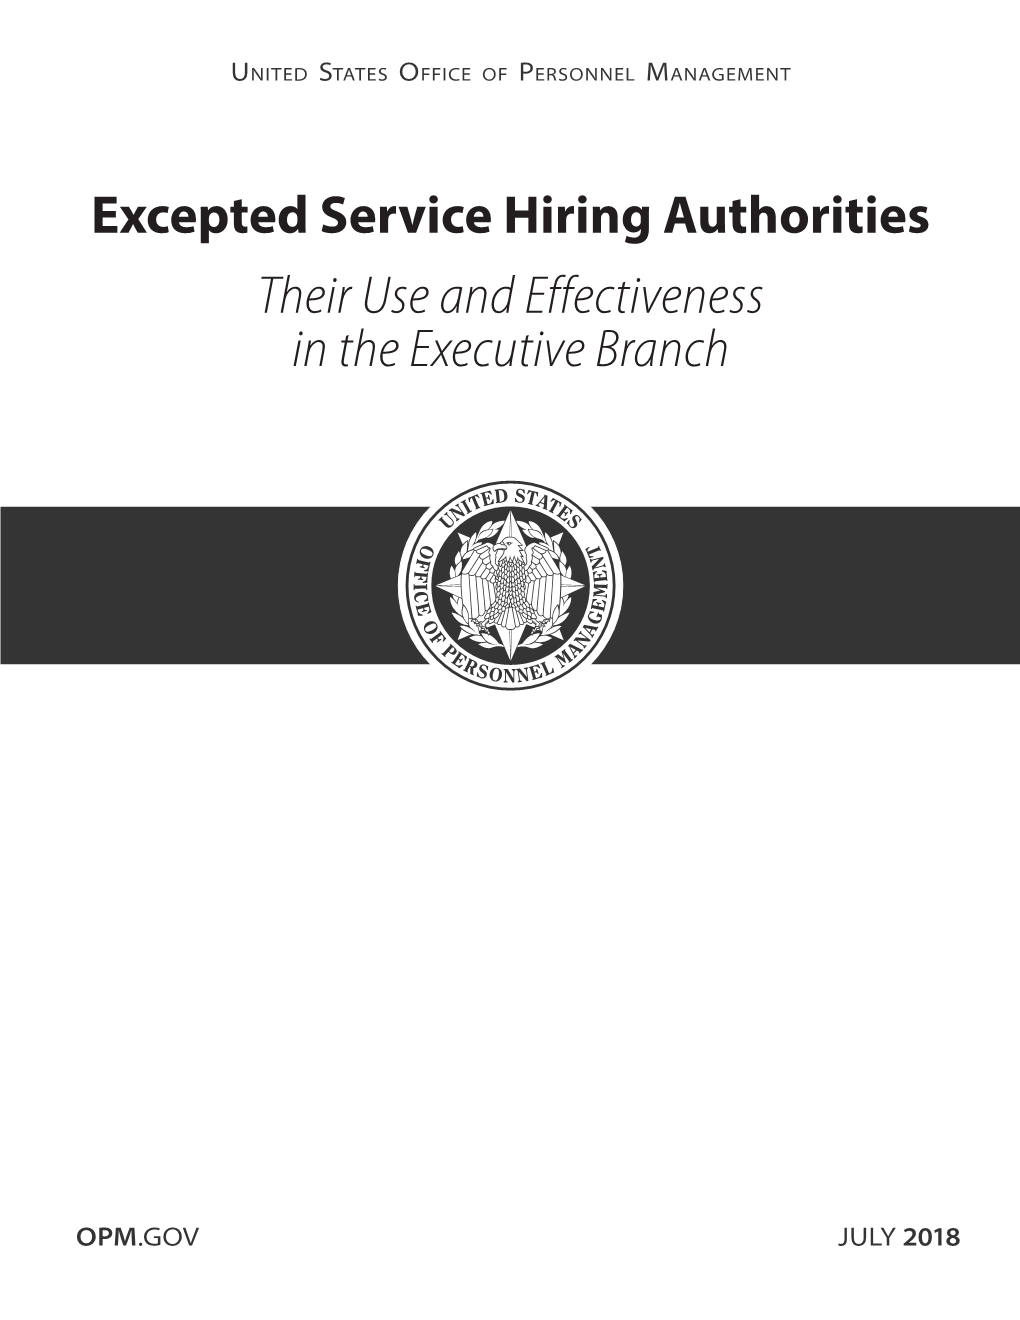 Excepted Service Hiring Authorities: Their Use and Effectiveness in The